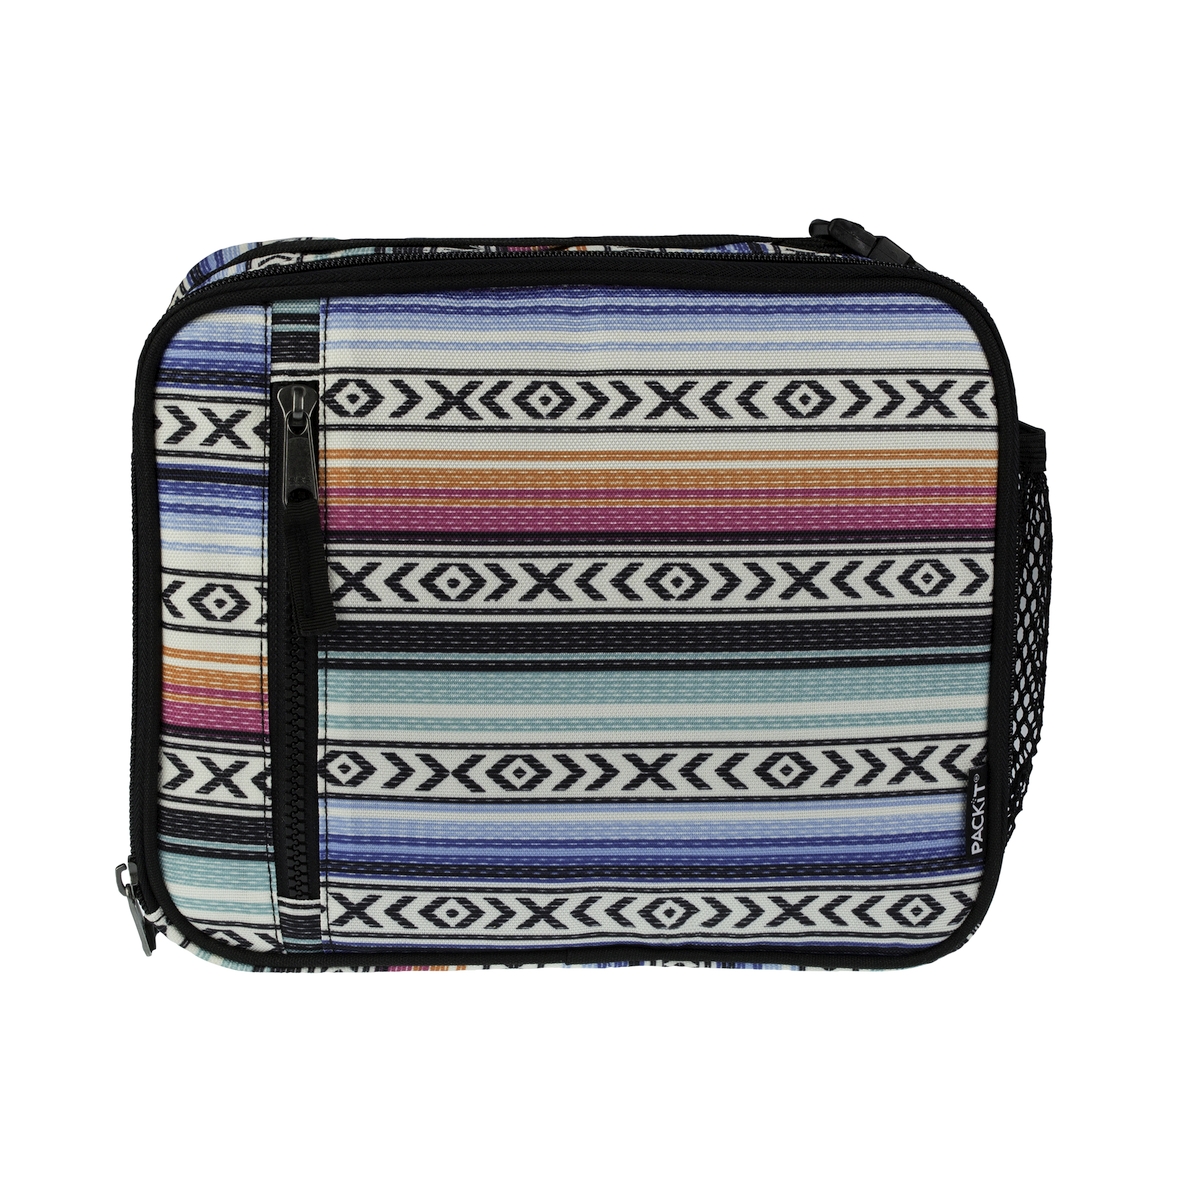     Classic Lunch box Fiesta (PACKiT PACKIT0025)